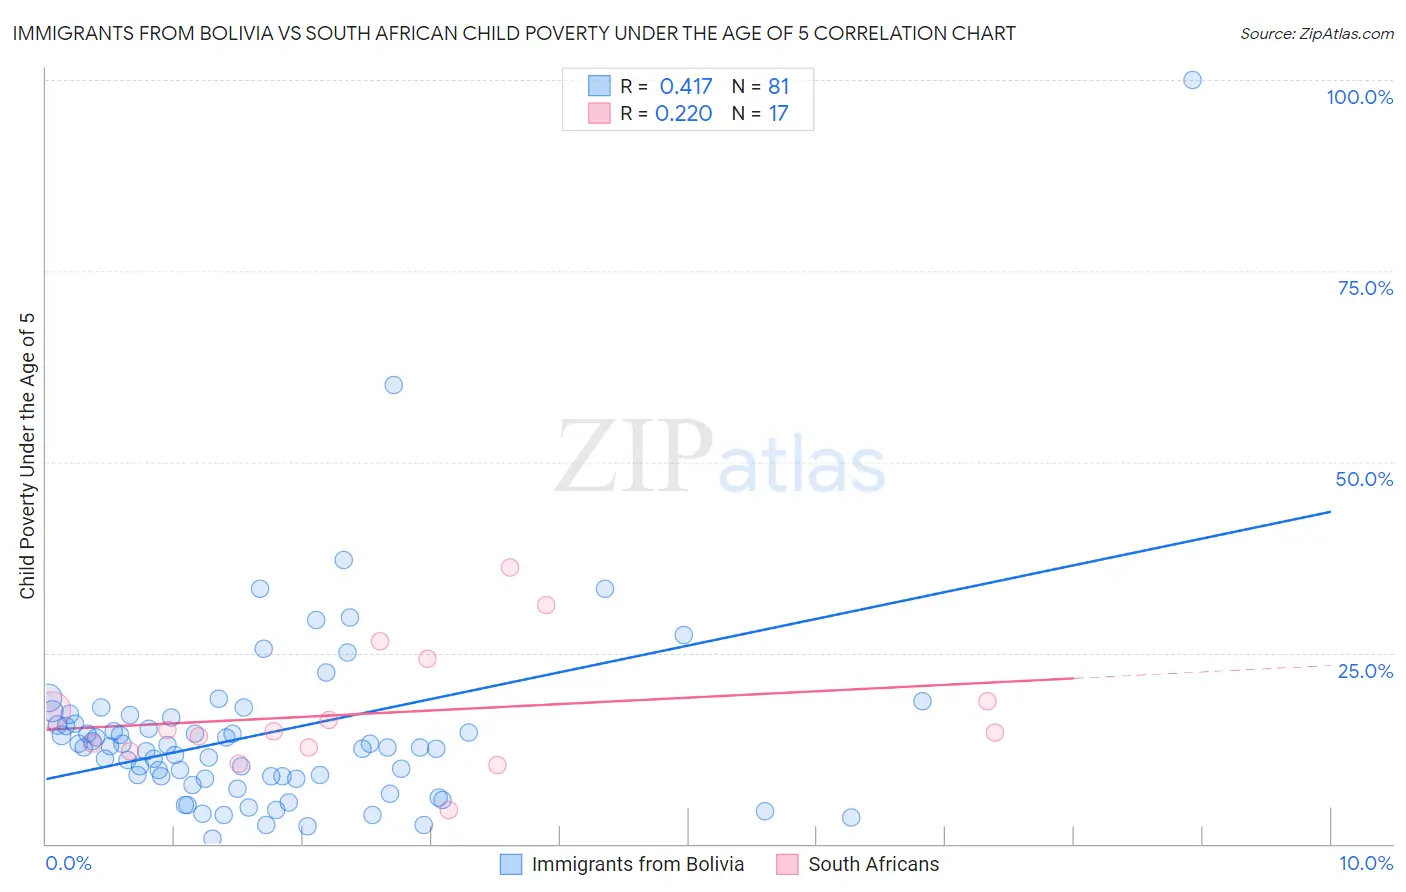 Immigrants from Bolivia vs South African Child Poverty Under the Age of 5